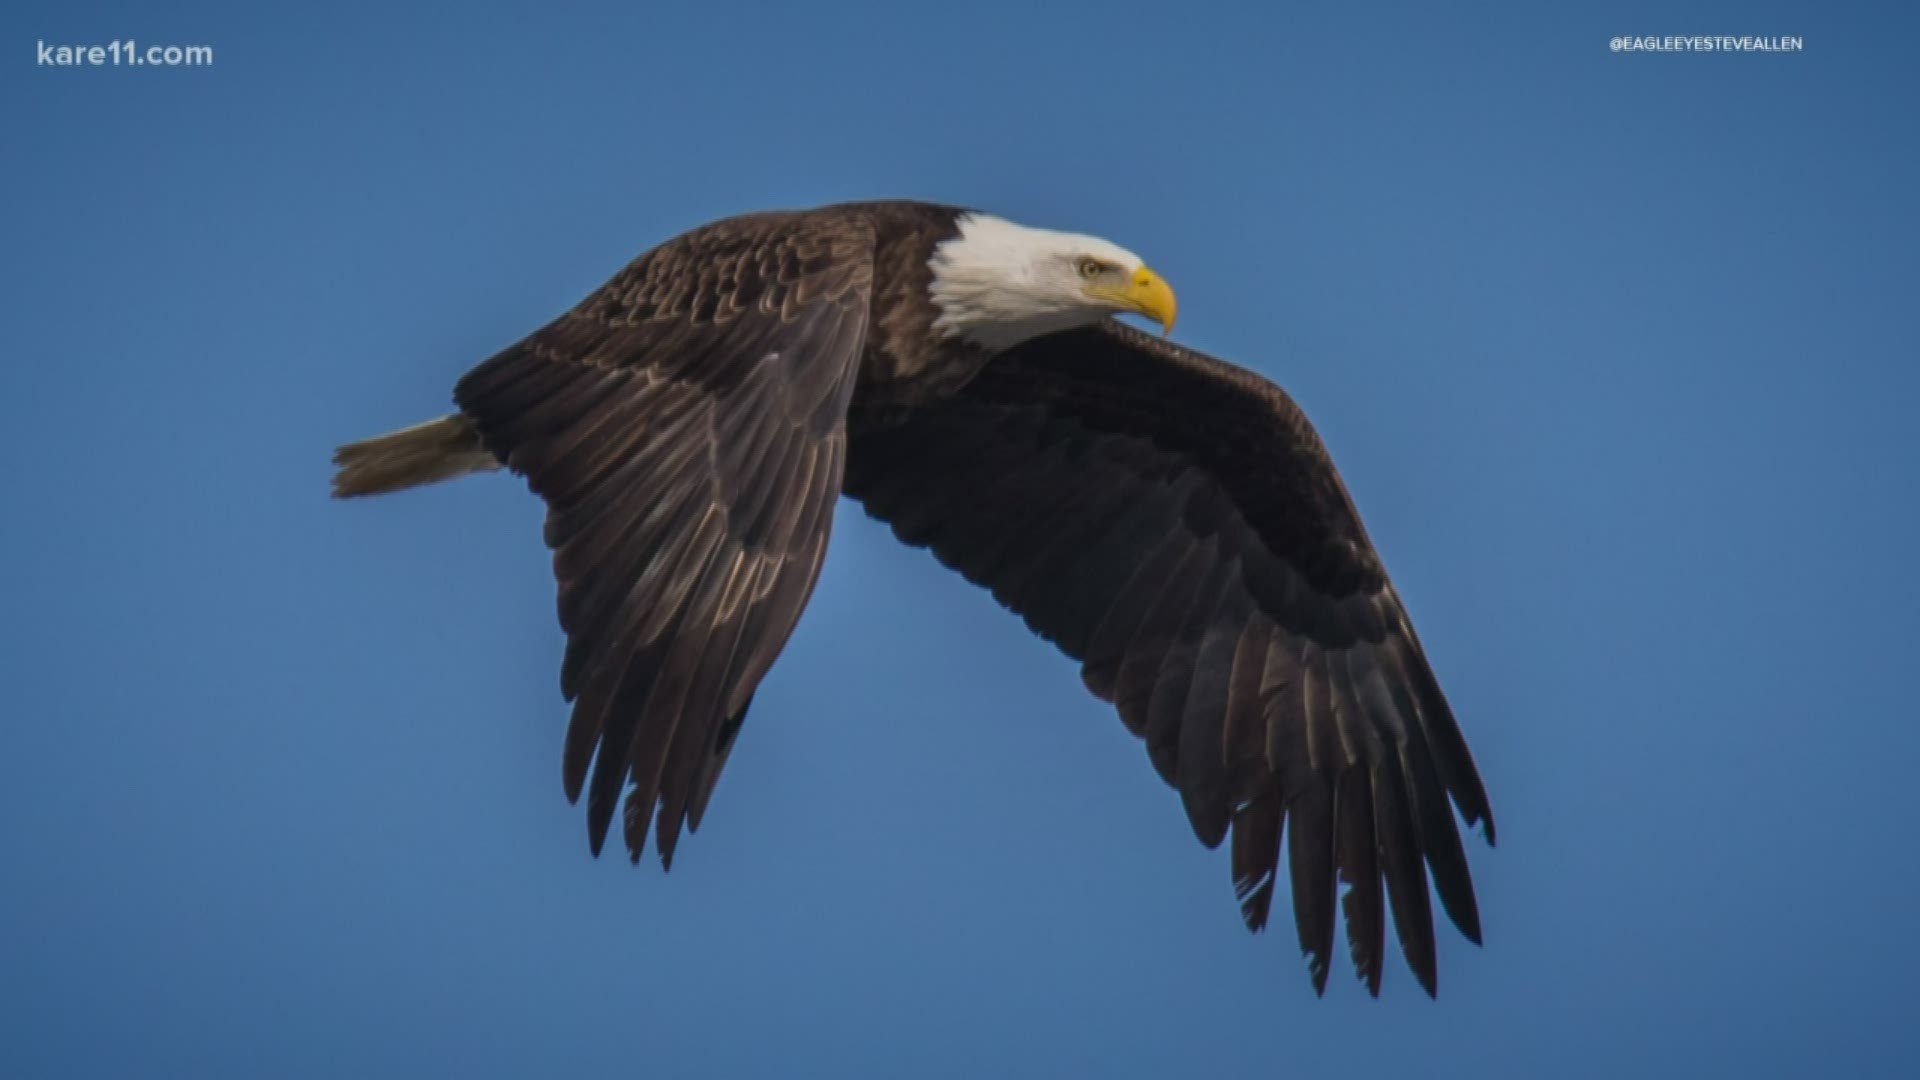 Those researchers from UW-Madison says it could be connected to the fatal Wisconsin River Eagle Syndrome.